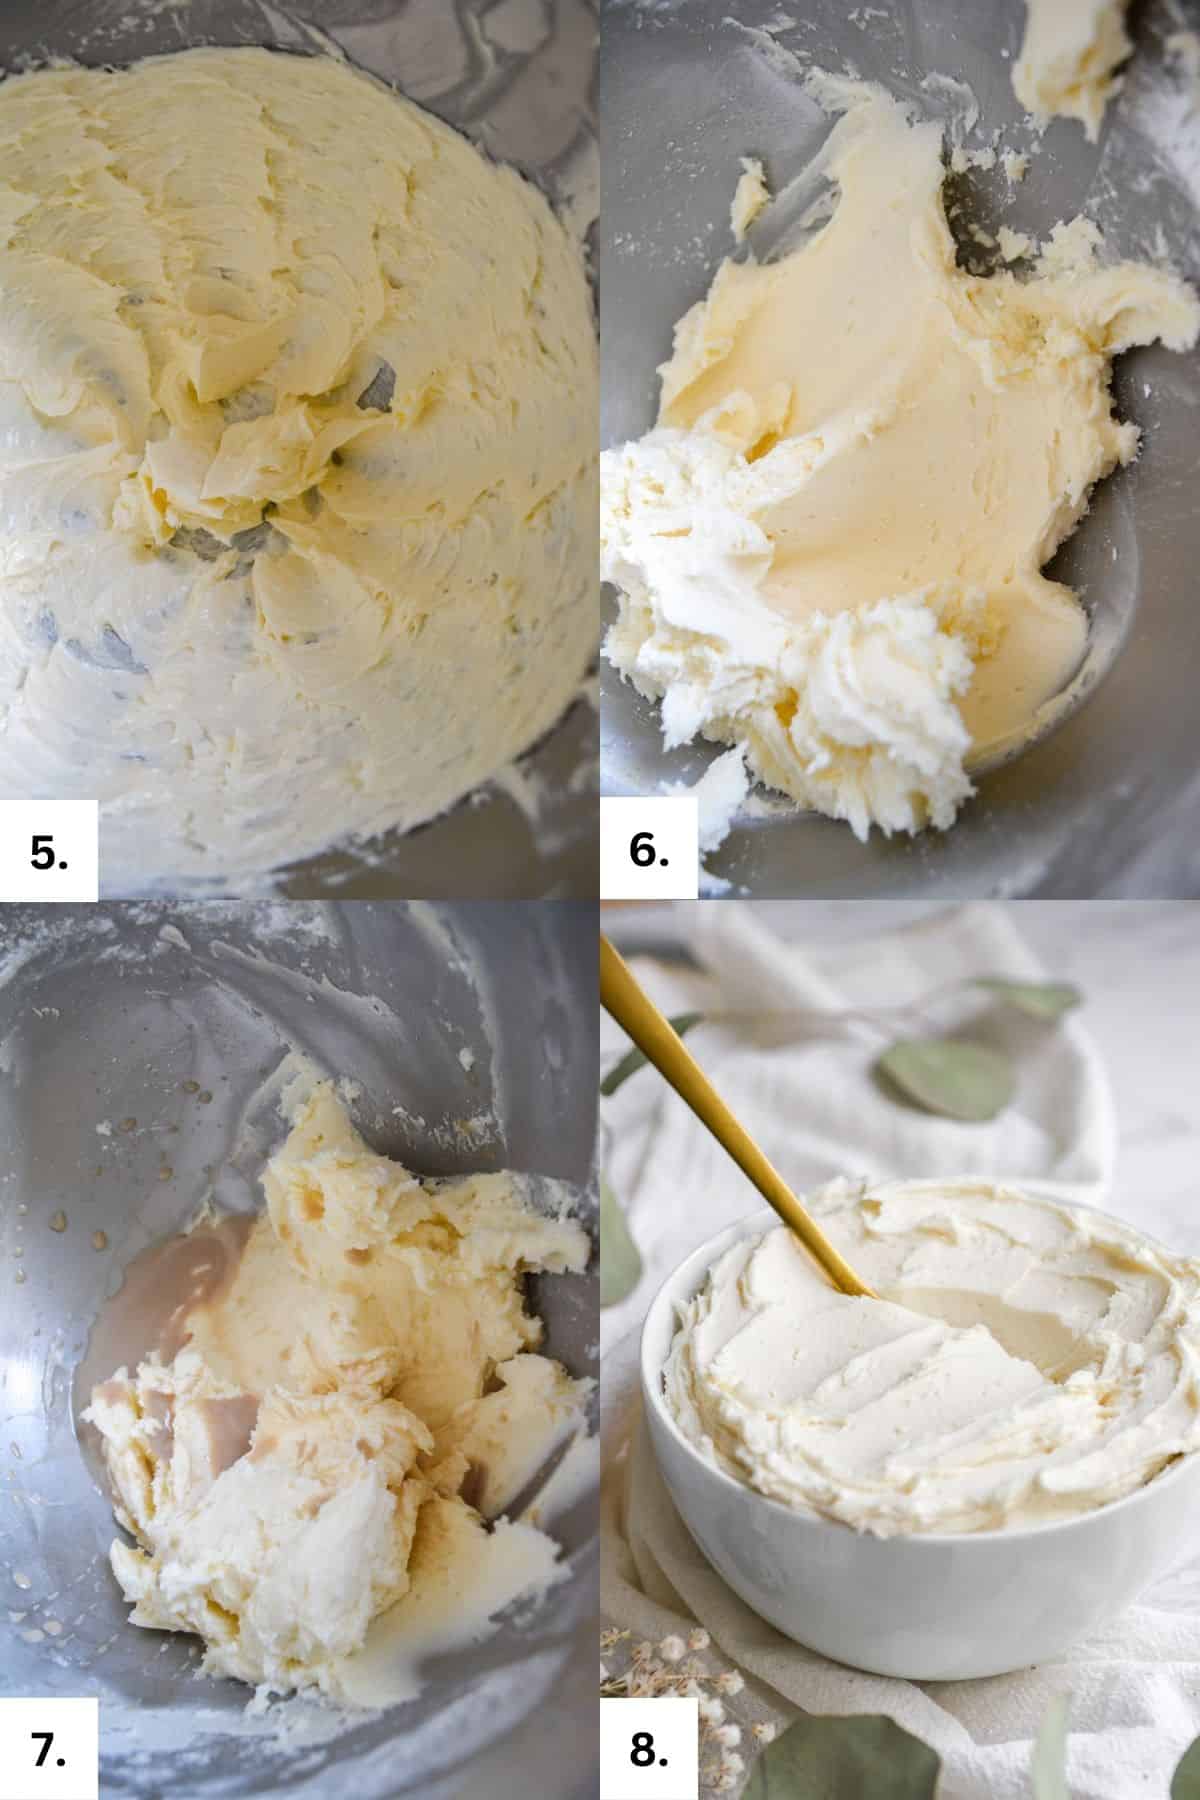 Step-by-step photos of making vegan vanilla frosting.